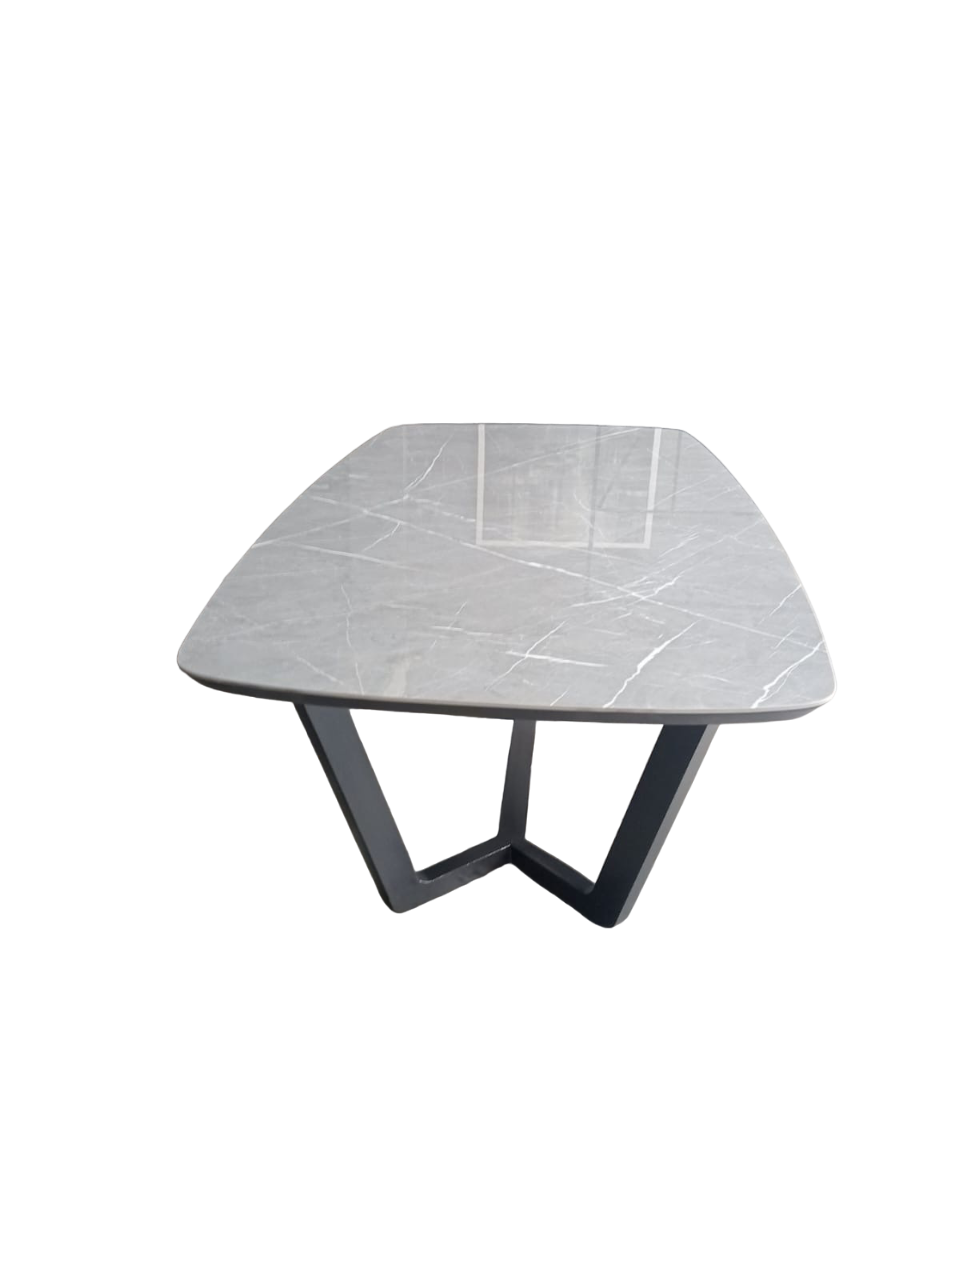 Light grey stone top dining table with black wooden legs. Custom made for a client.